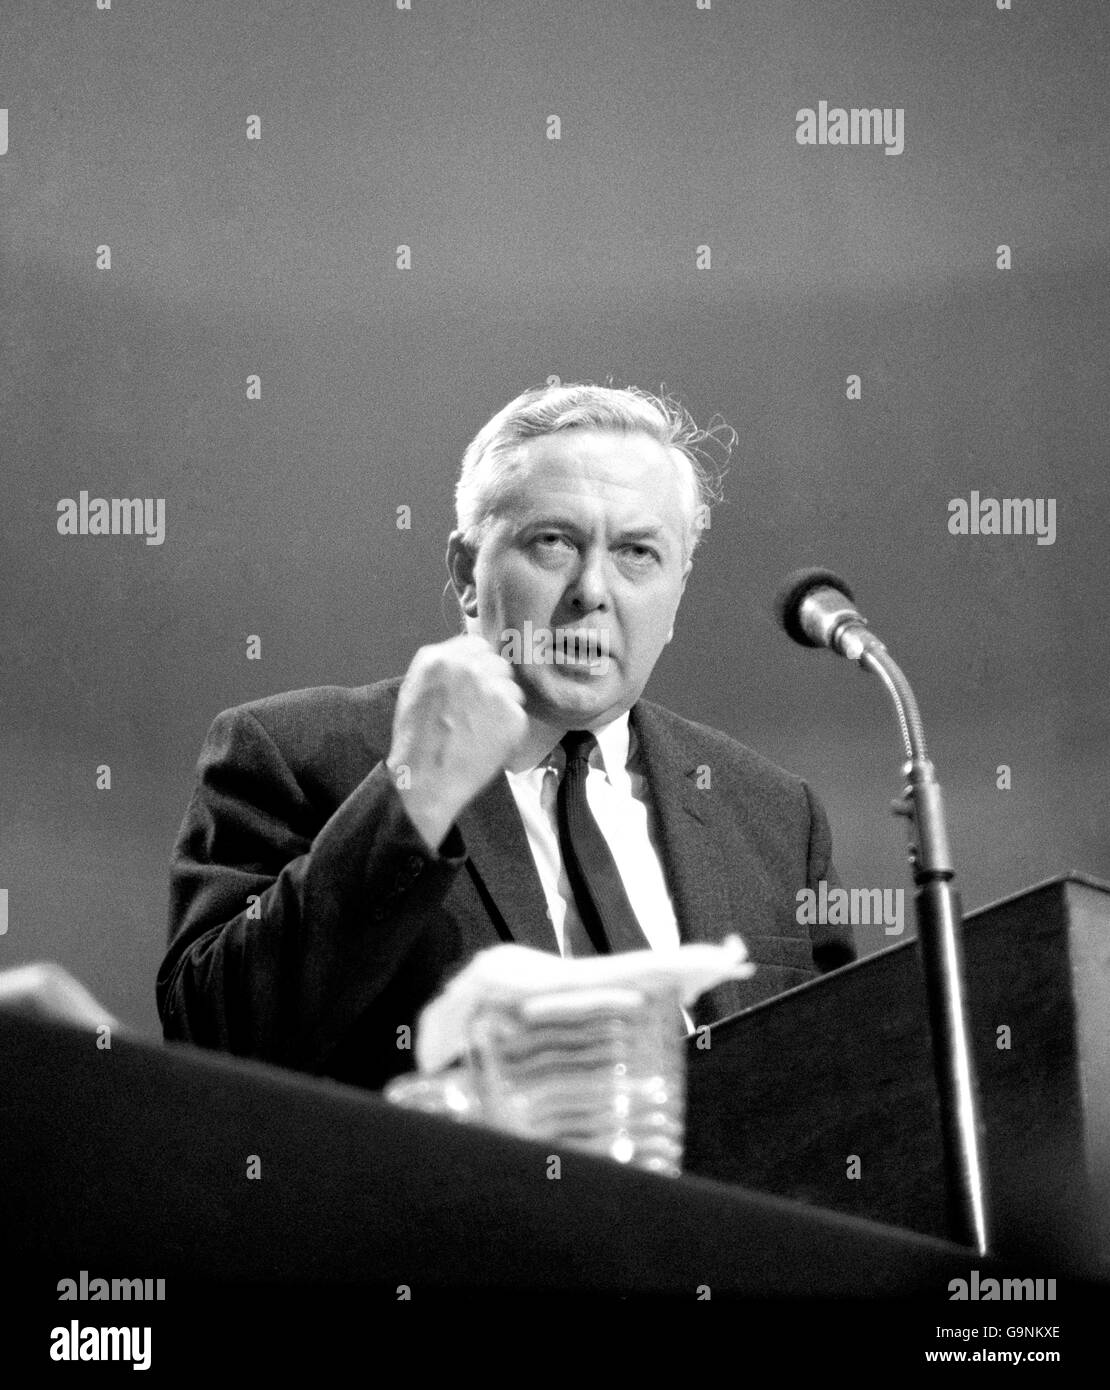 Harold Wilson addressing the Labour Conference for the first time as the Party's leader. He made his debut by introducing the Party police pamphlet on the scientific revolution. Stock Photo